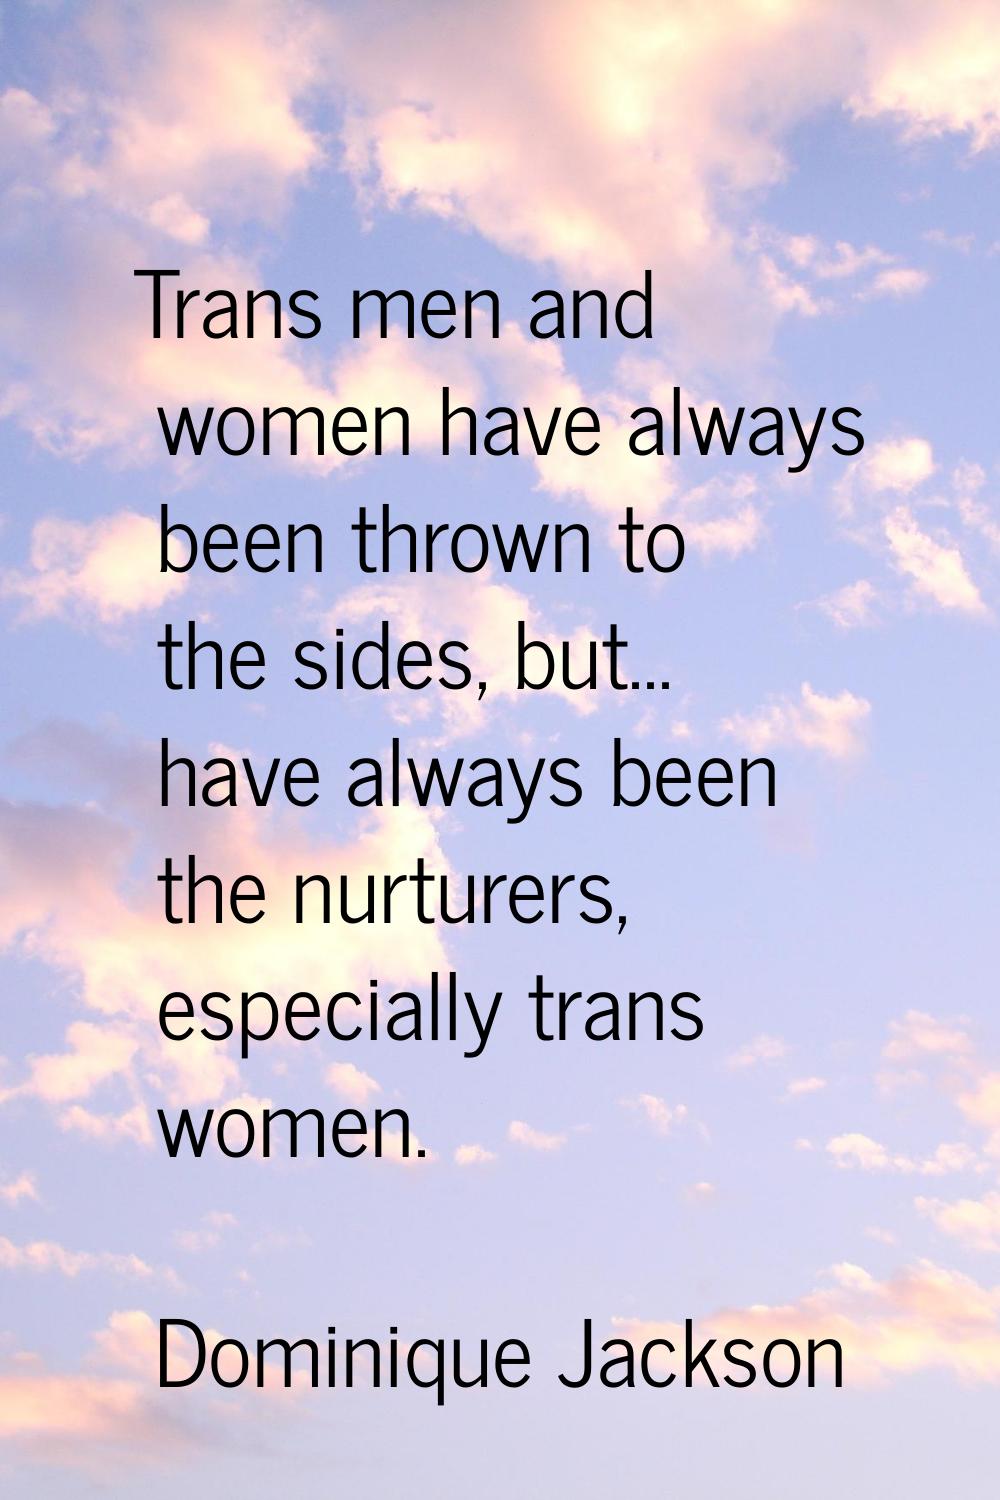 Trans men and women have always been thrown to the sides, but... have always been the nurturers, es